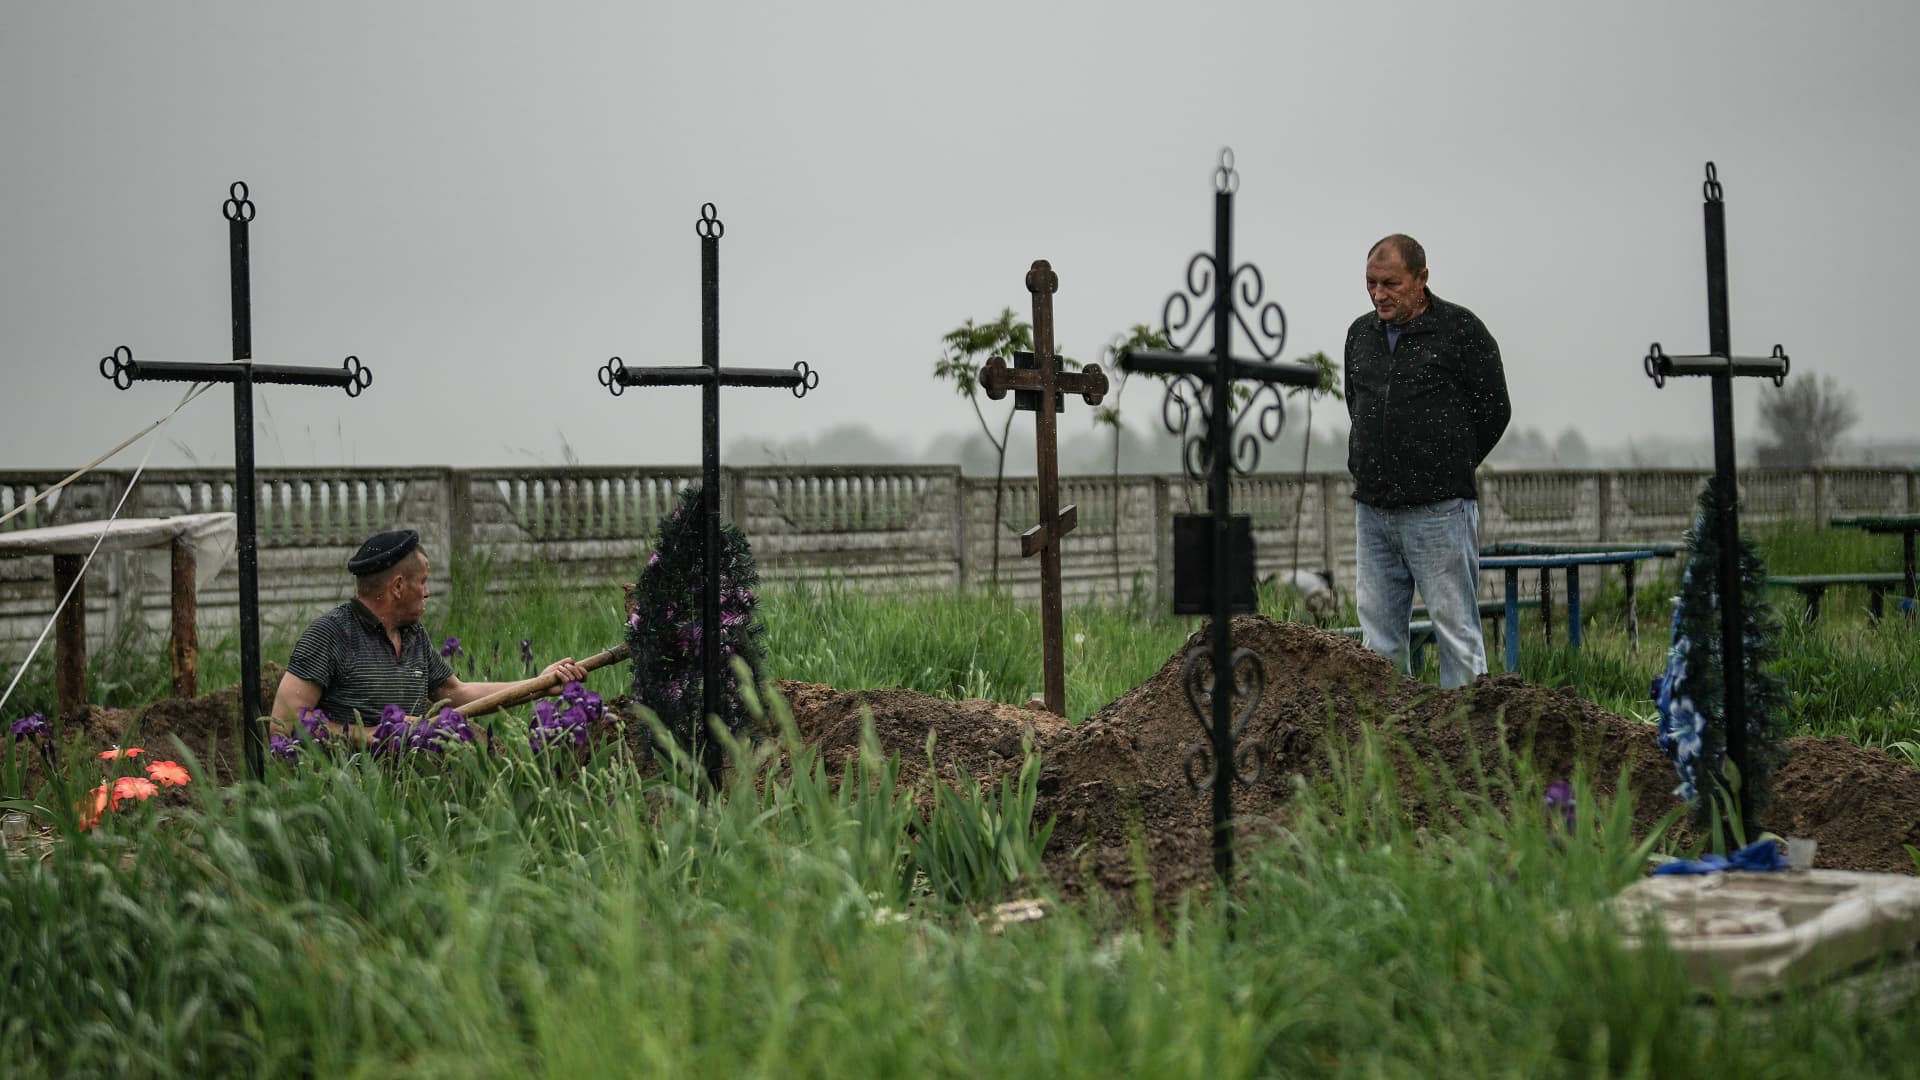 Buzova village resident Oleksandr (surname withheld) looks on as police exhume the bodies of his mother, brother and son to investigate alleged war crimes by Russian forces during the invasion of Ukraine on May 21, 2022 in Kyiv, Ukraine.